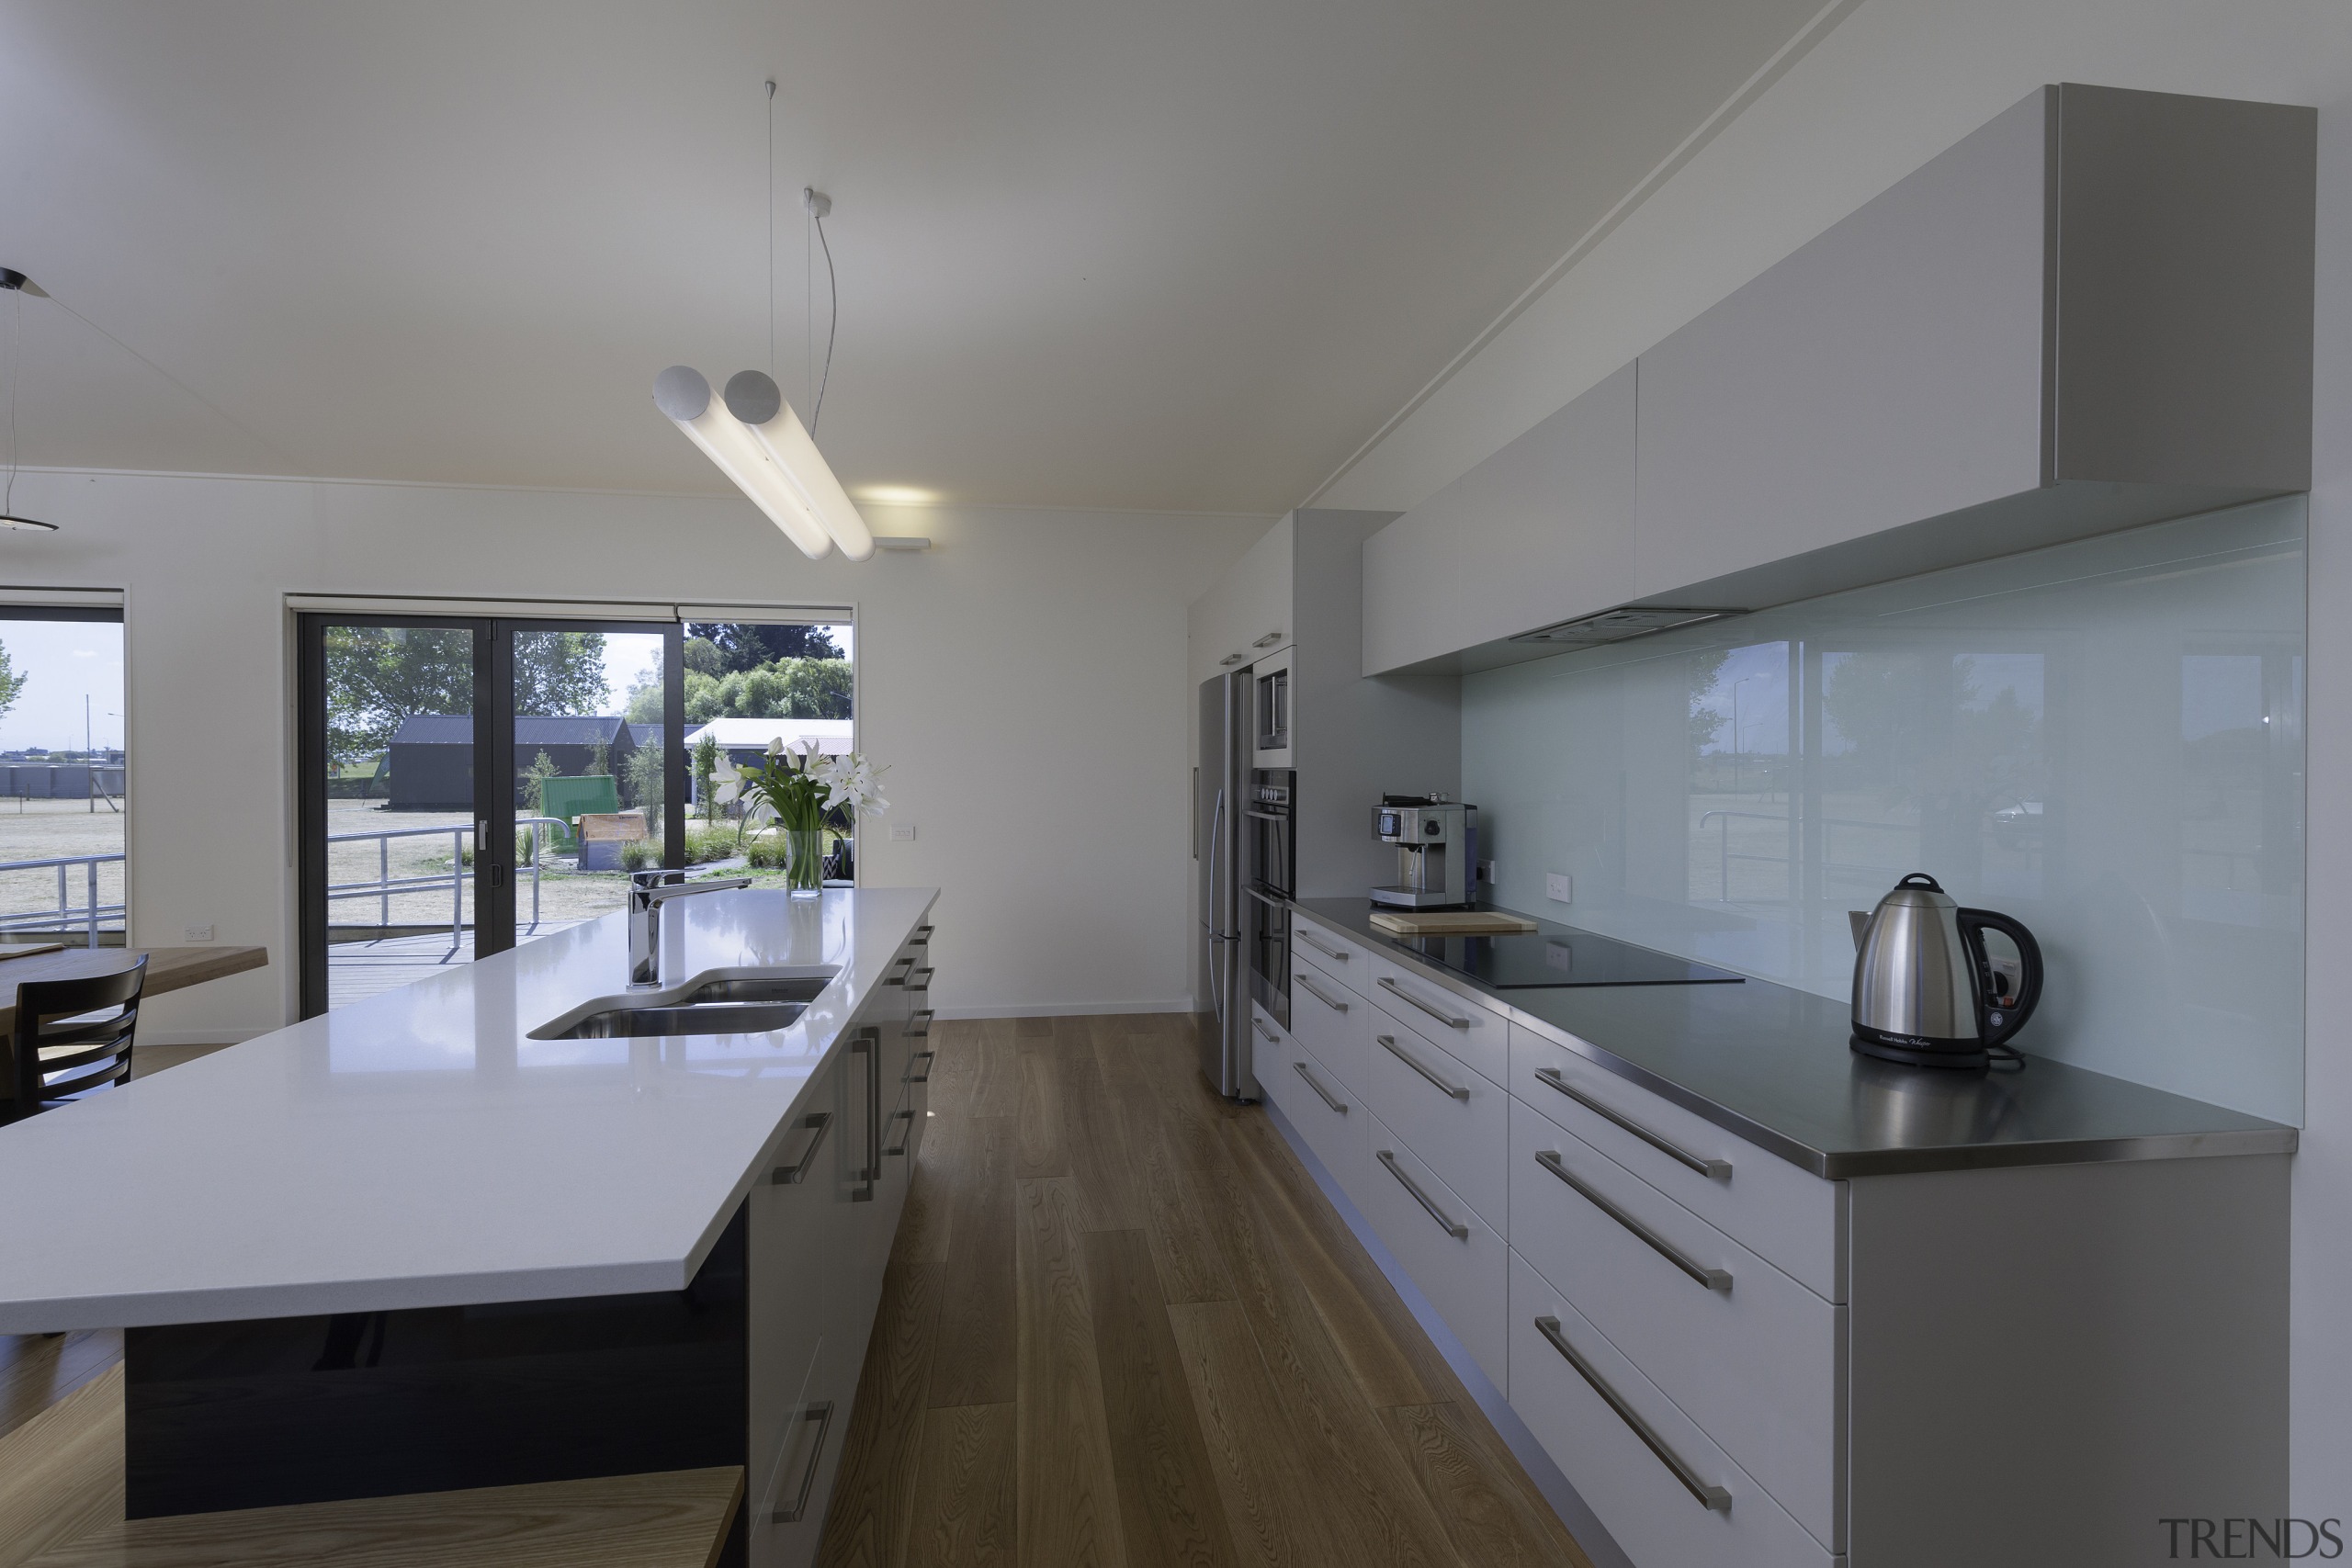 Raising the benchmark  myHomestar by NZGBC - architecture, countertop, daylighting, house, interior design, kitchen, property, real estate, room, gray